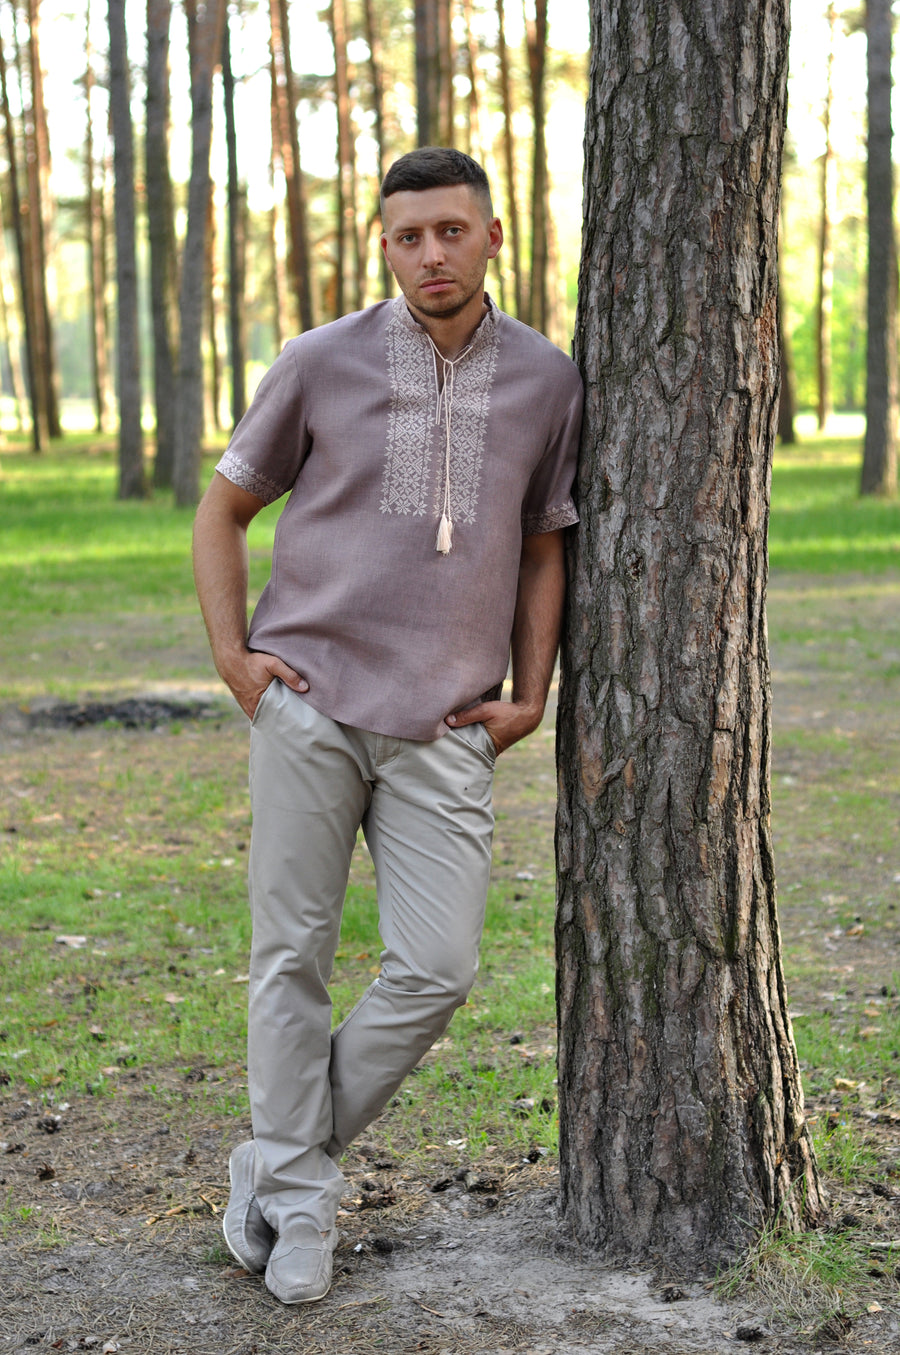 Linen embroidered short sleeve shirt for a stylish man